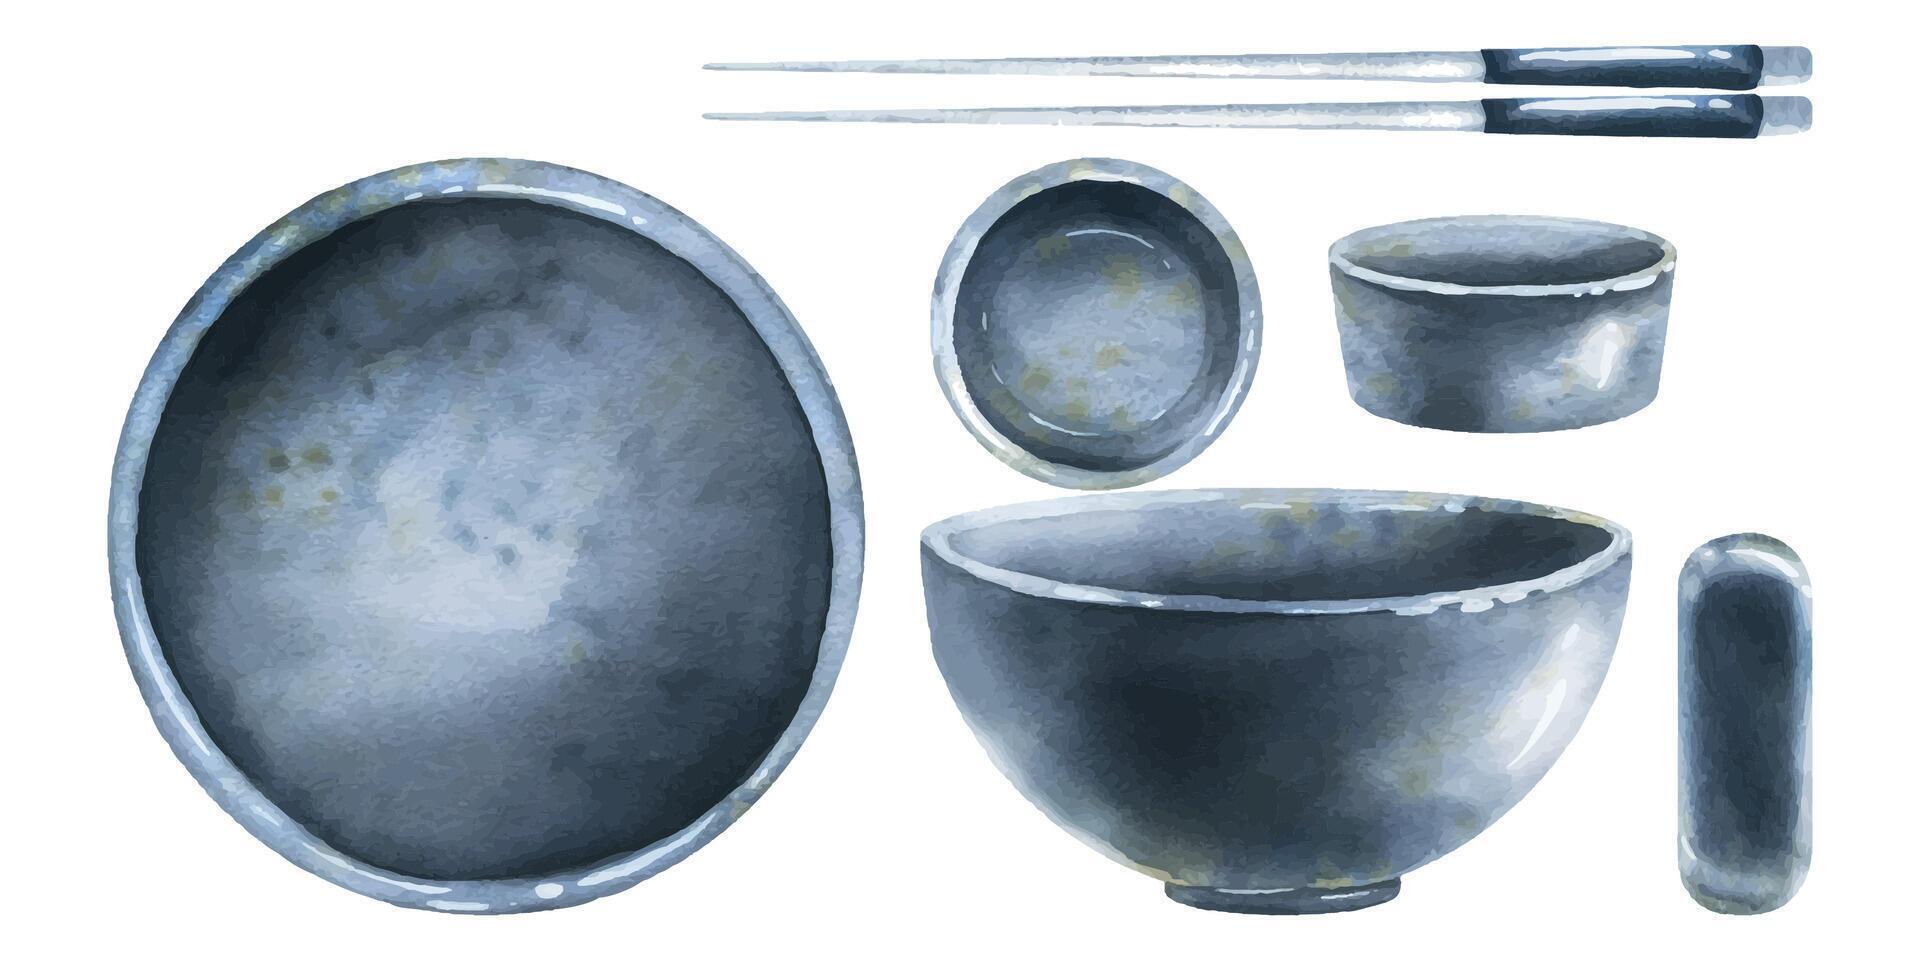 A set of ceramic dishes, a bowl, a saucepan, chopsticks, a stand top and side view. Watercolor illustration. Isolated objects from the SHRIMP collection. For decoration and design vector